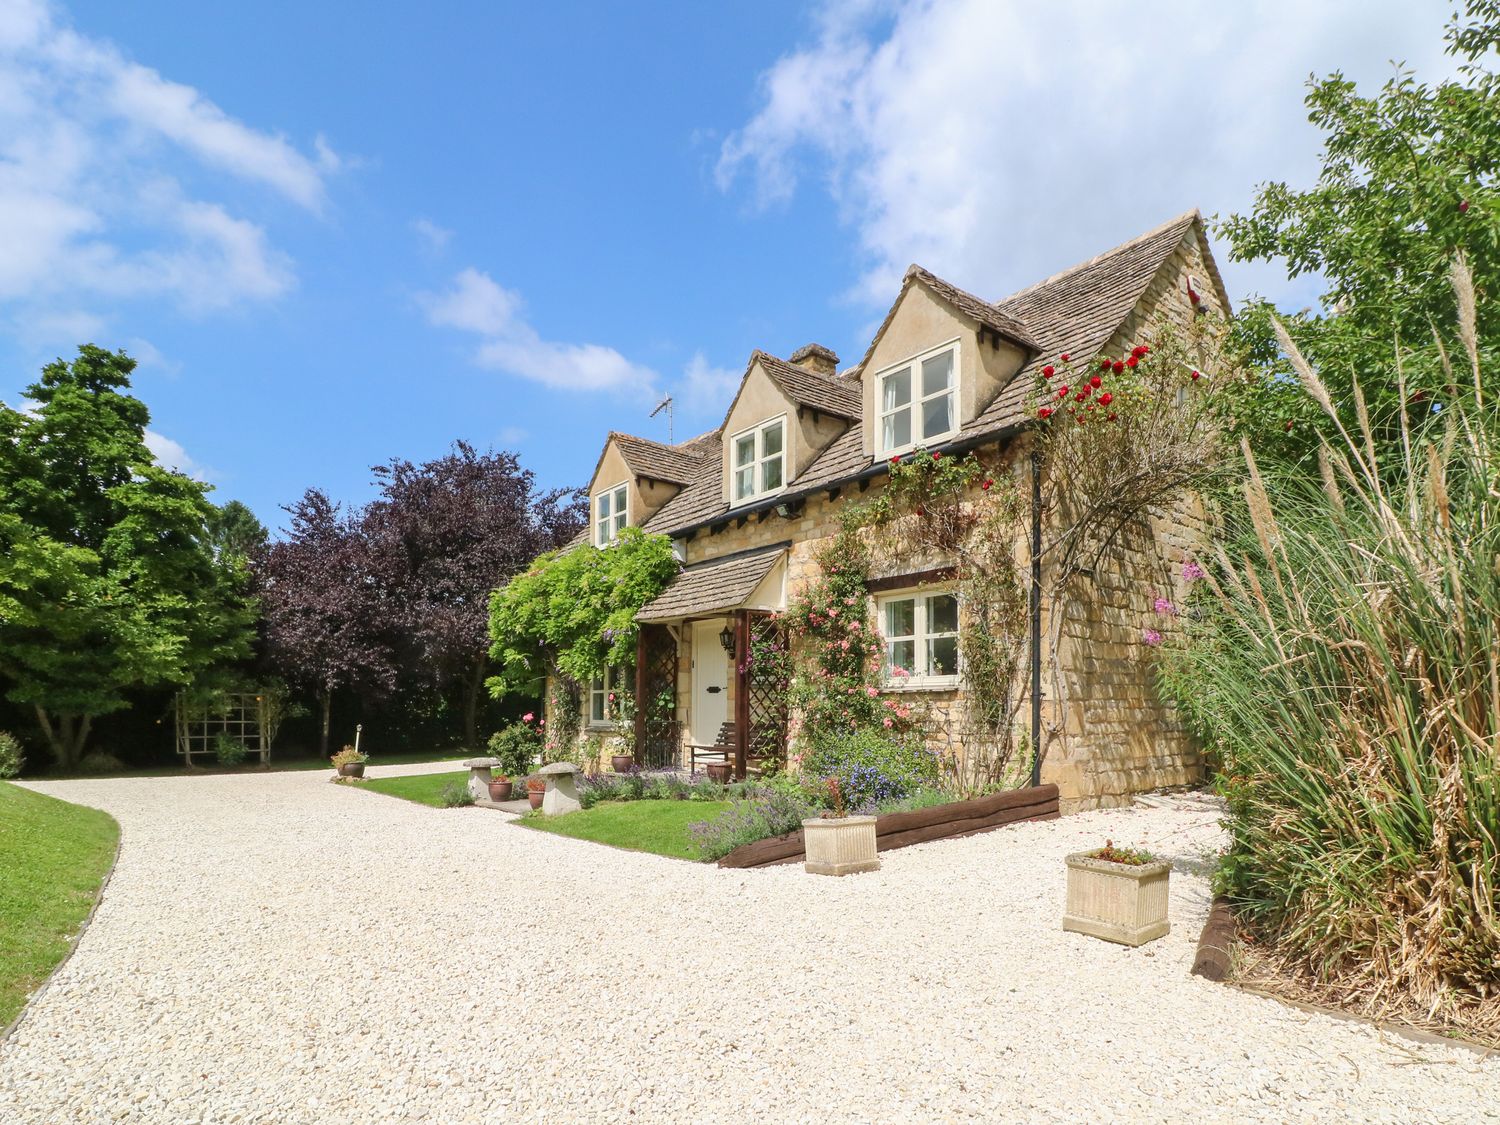 Orchard Cottage. - Cotswolds - 988784 - photo 1